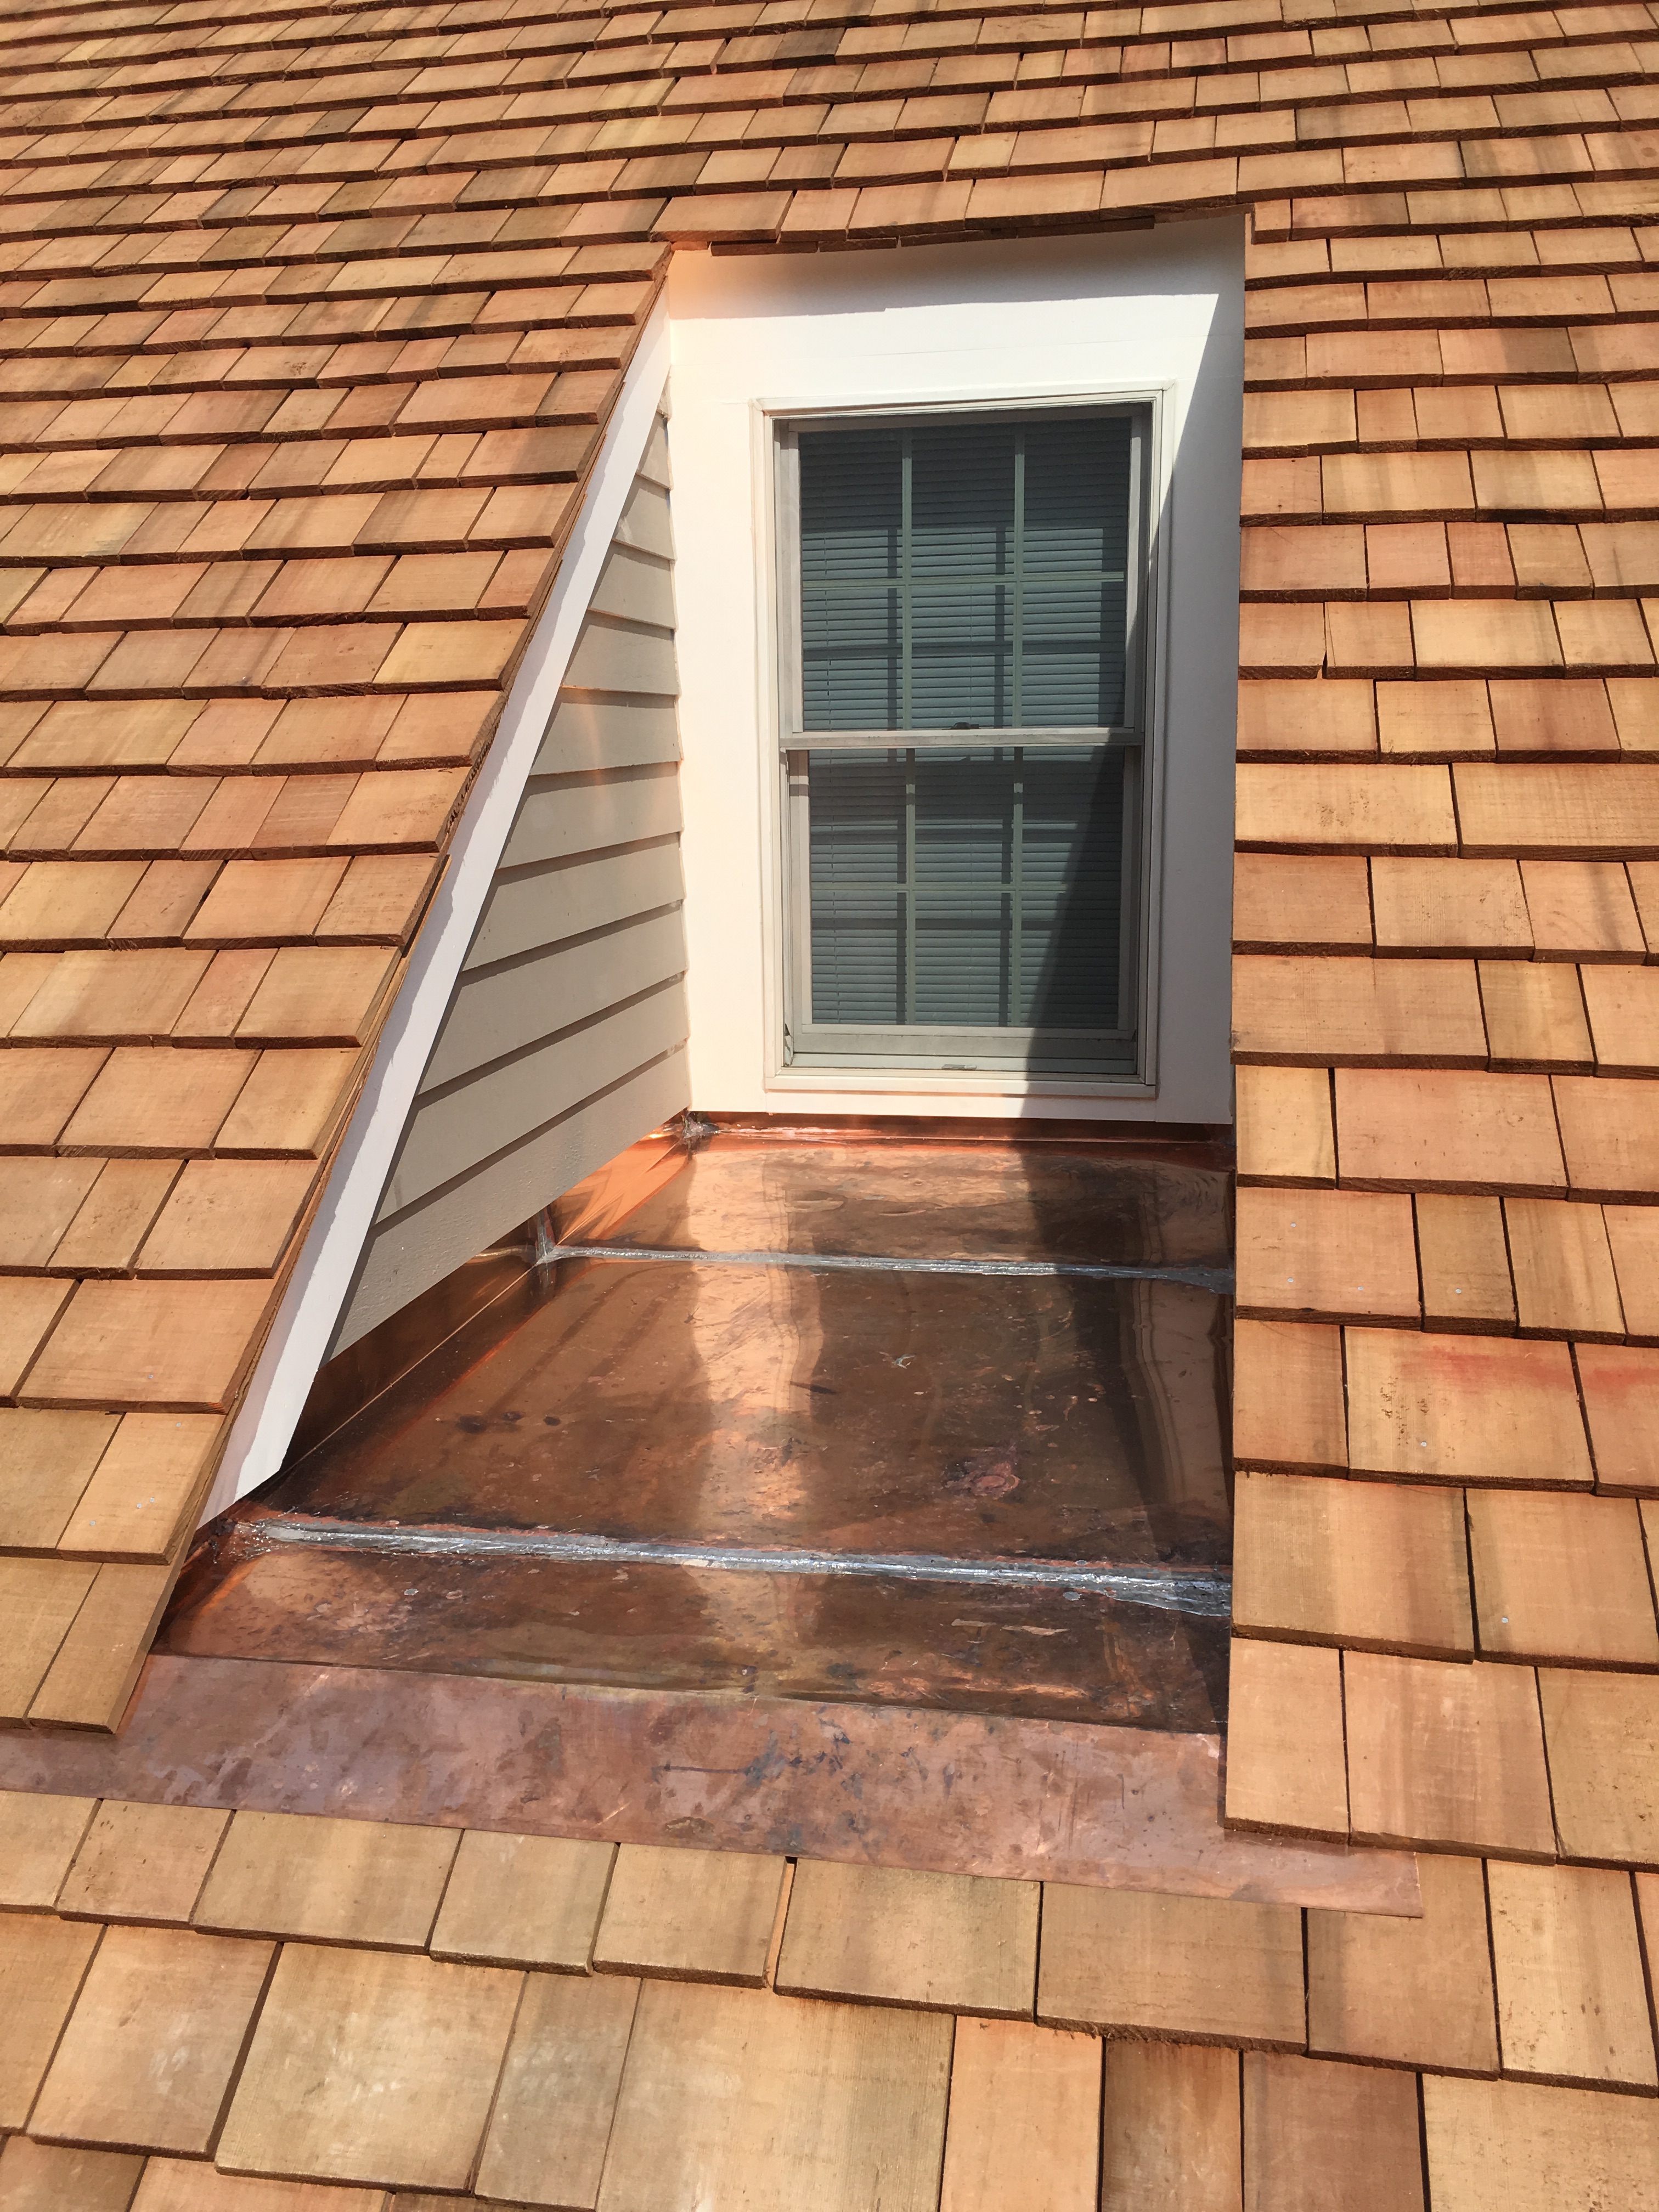  Cedar Shakes and Copper Roofing